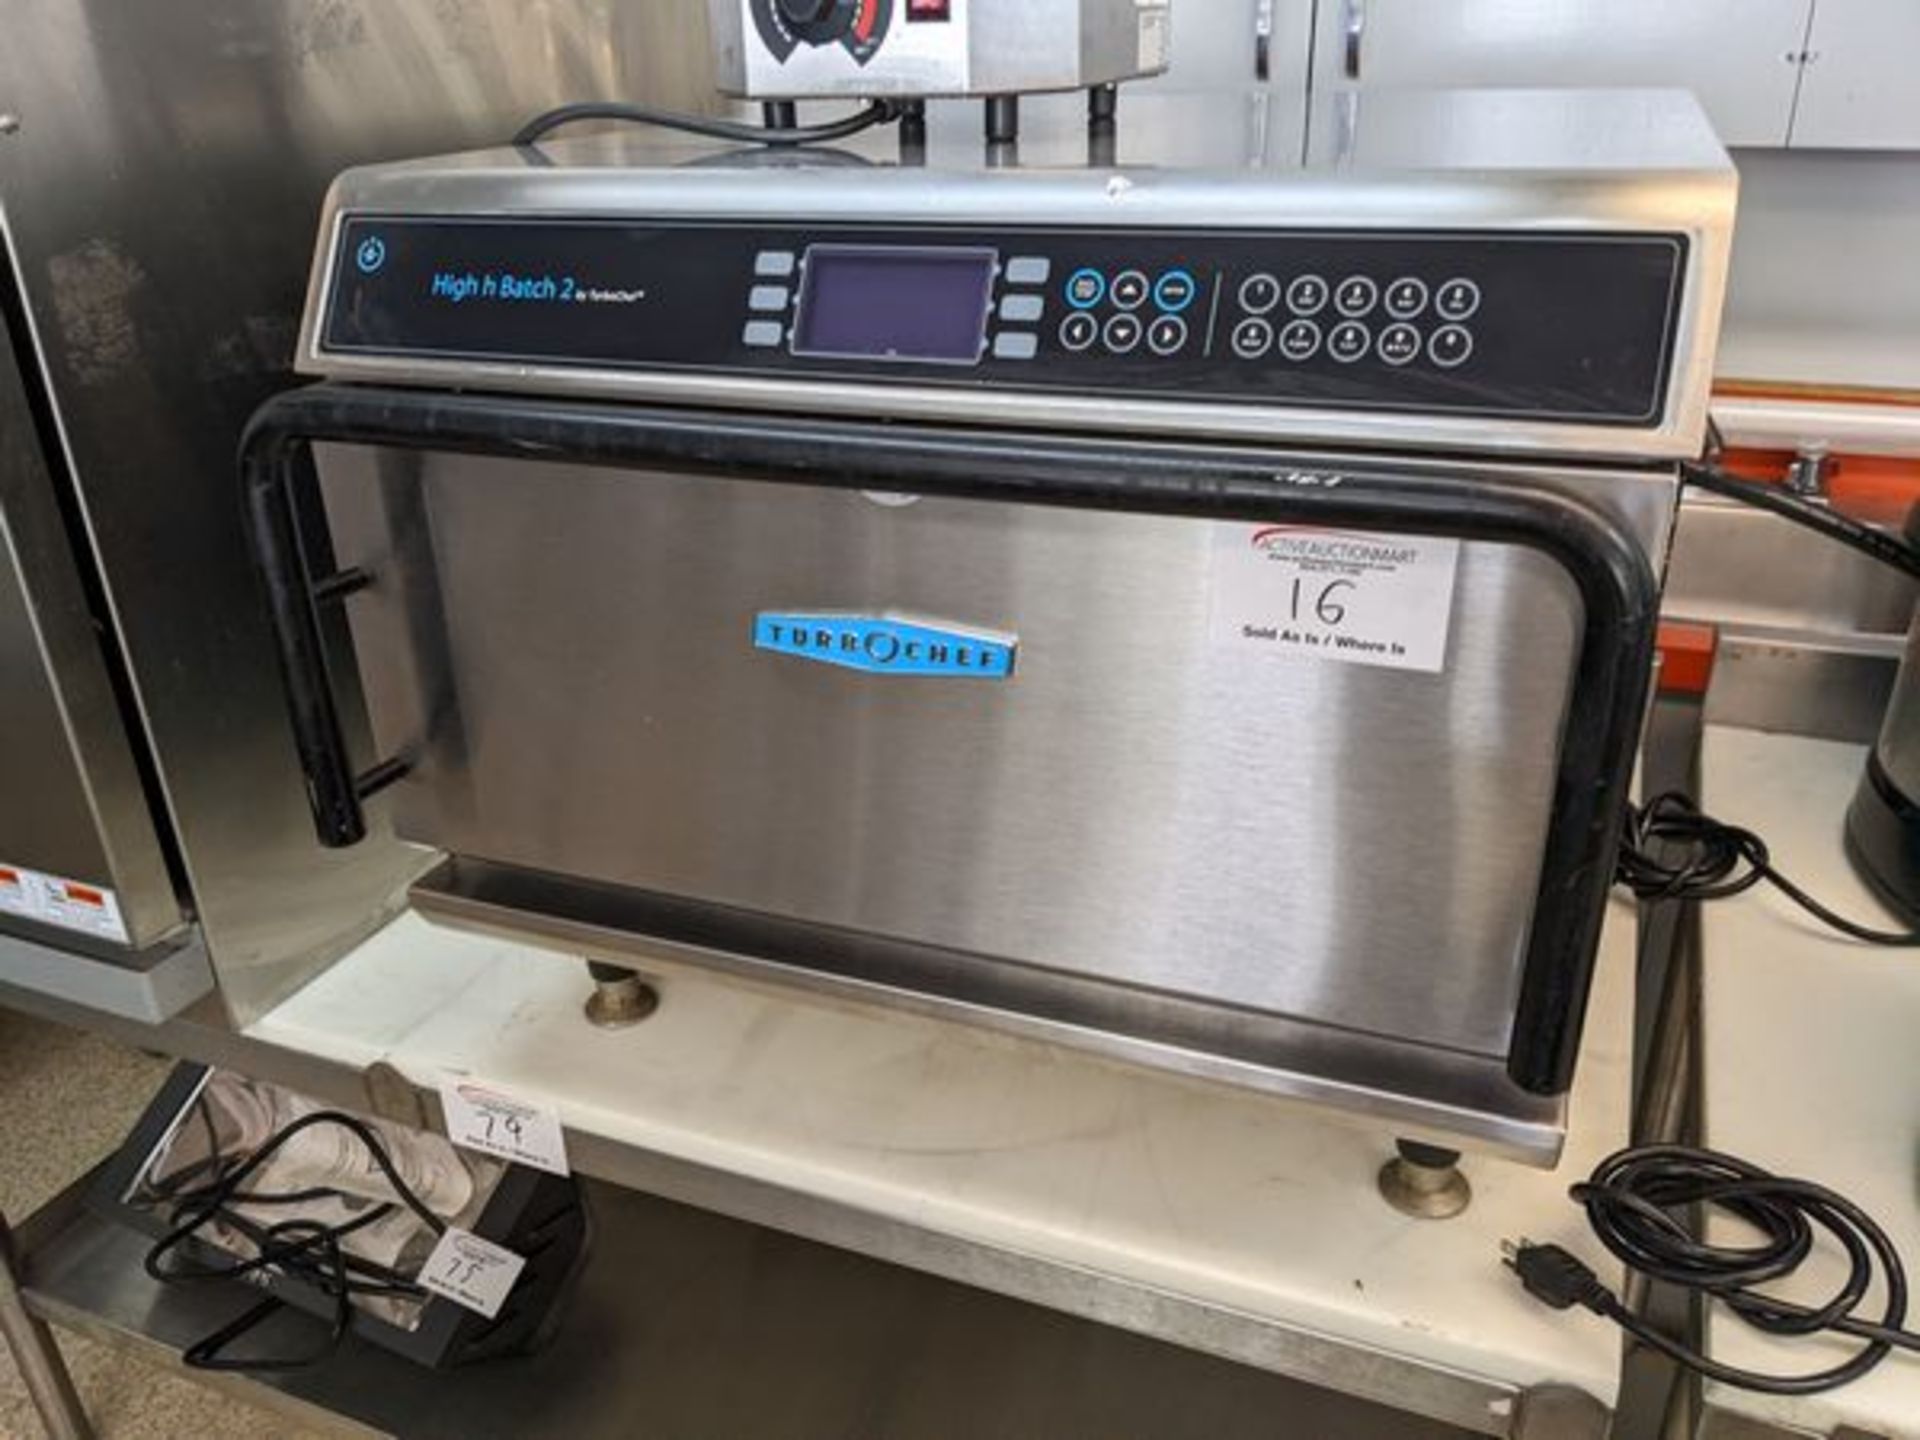 Turbo Chef High H Batch 2 Oven